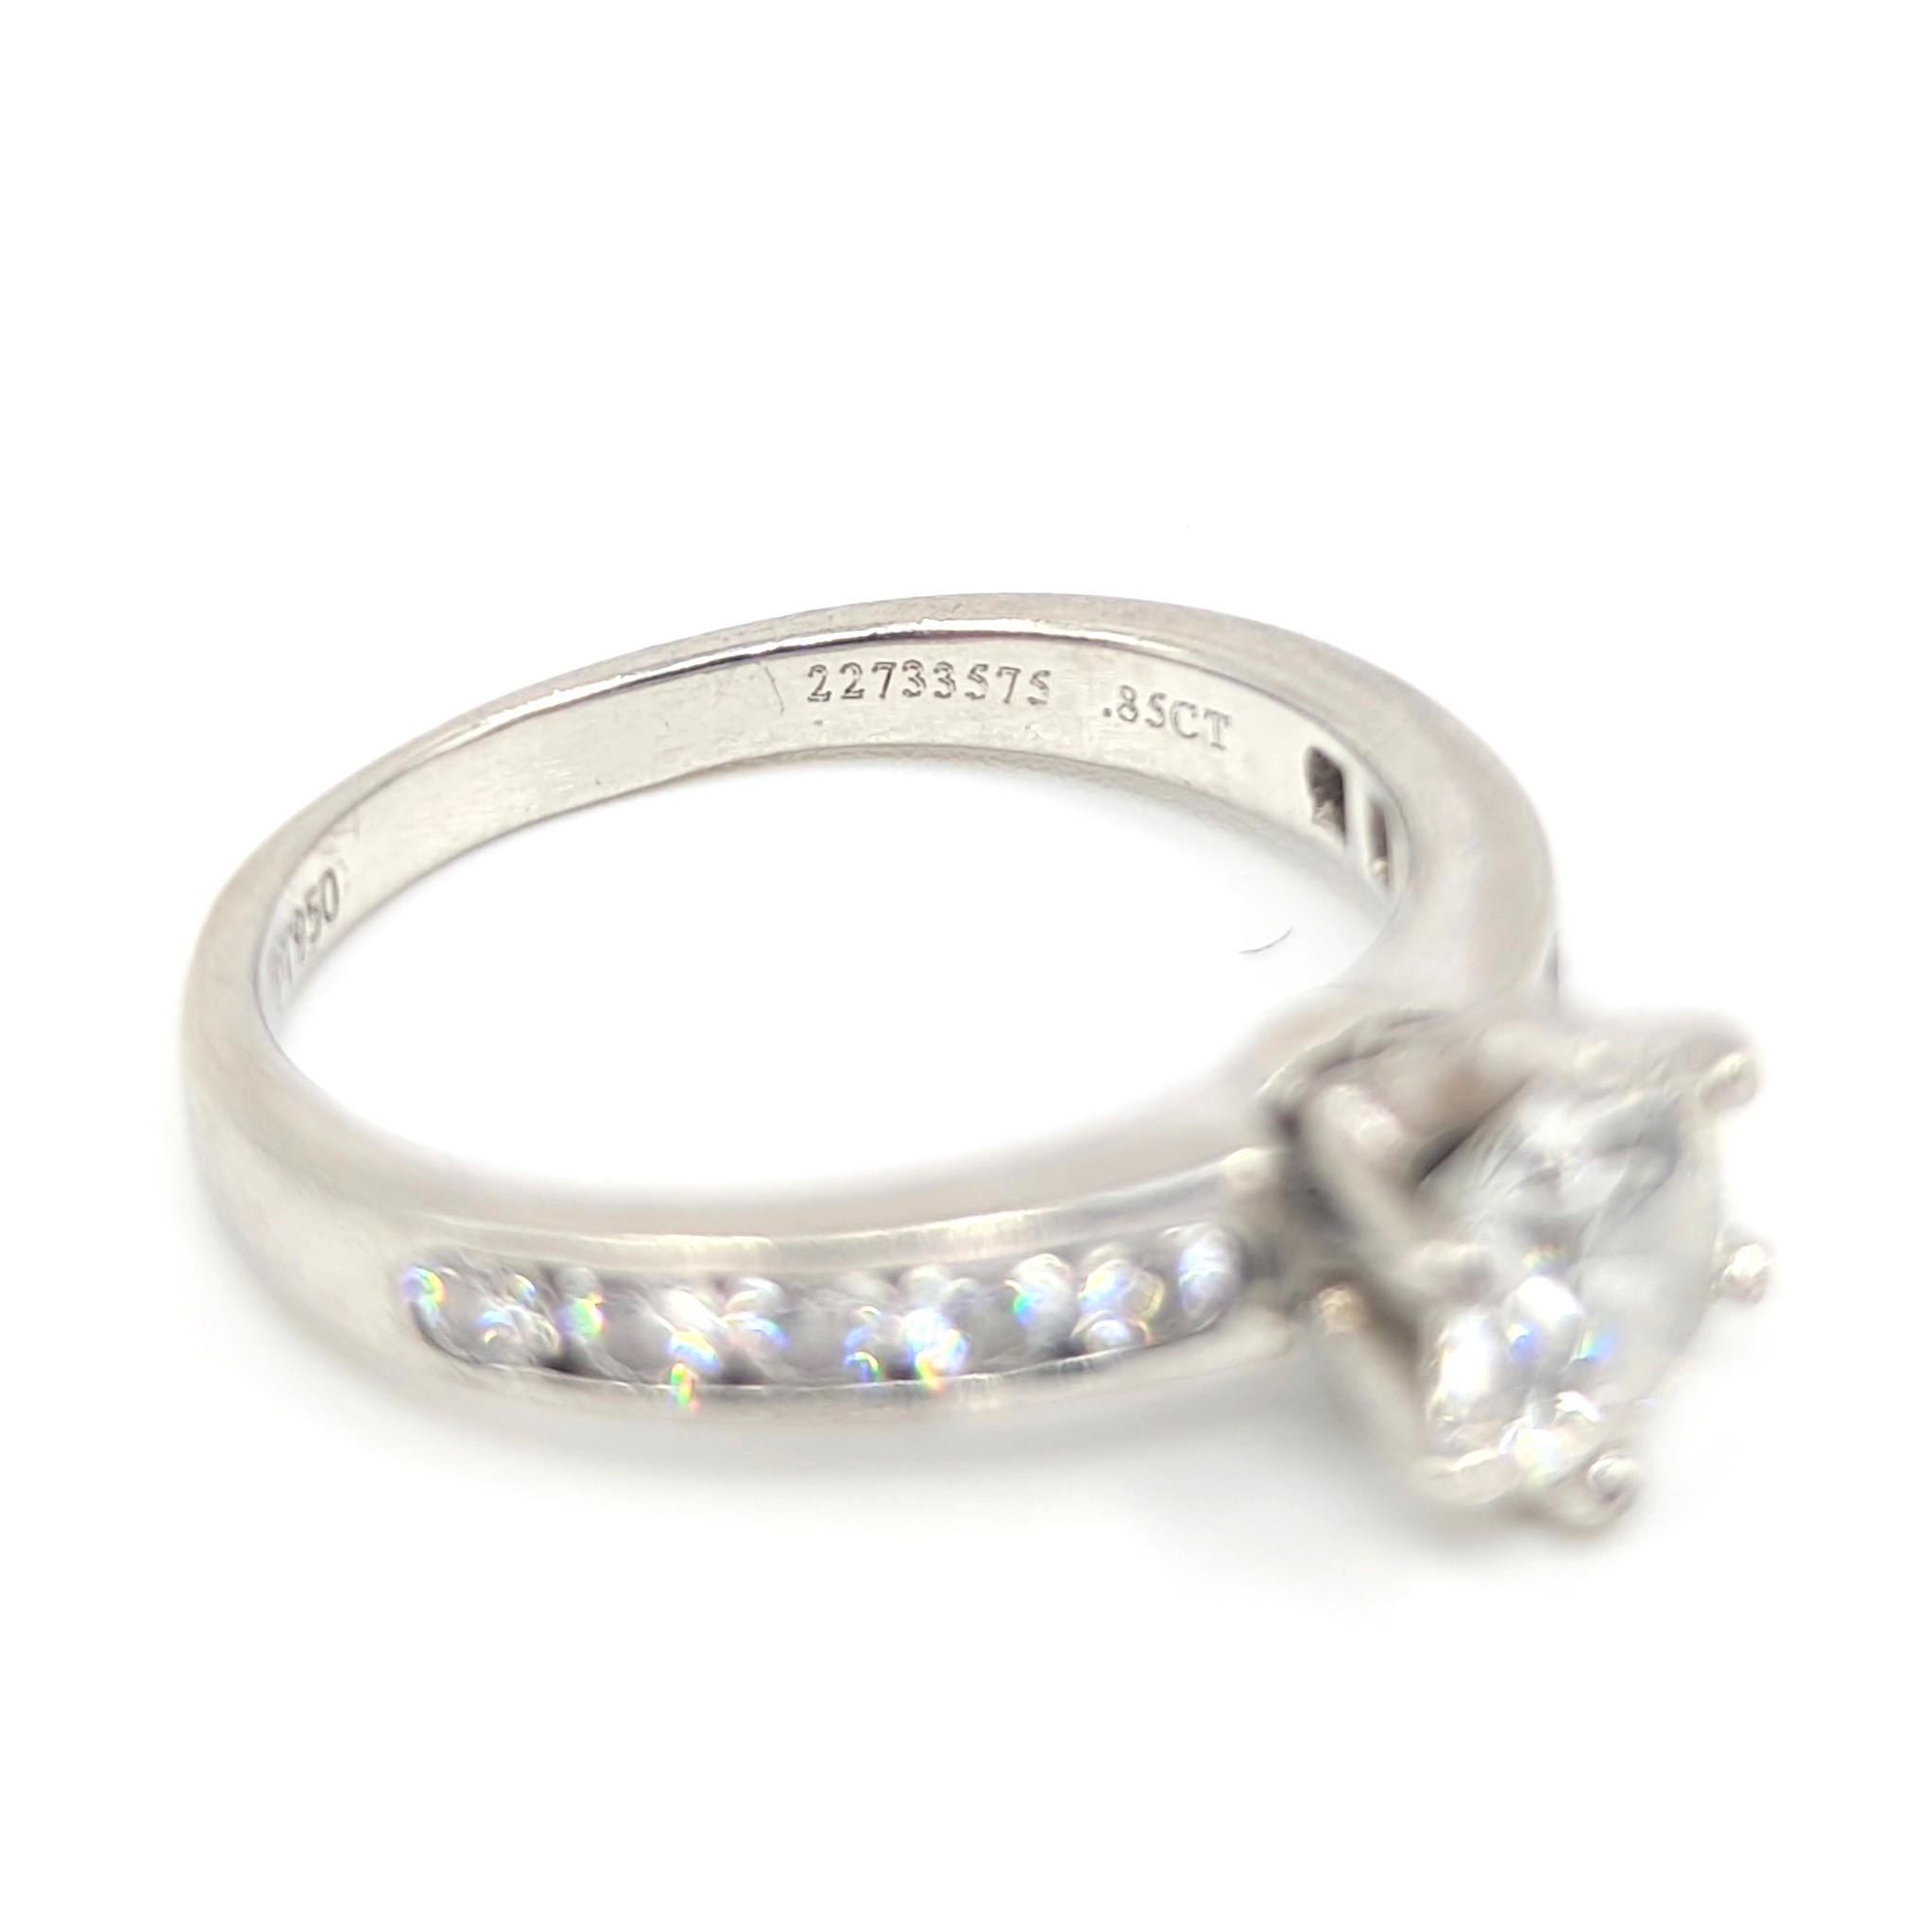 Tiffany & Co. original classic platinum diamond engagement ring, with a 0.85 CT (H, VS1, 3E) center diamond that is full of sparkles, and 10 brilliant round diamonds channel set in the shanks totalling approx 0.3 CT for total diamond weight of 1.15